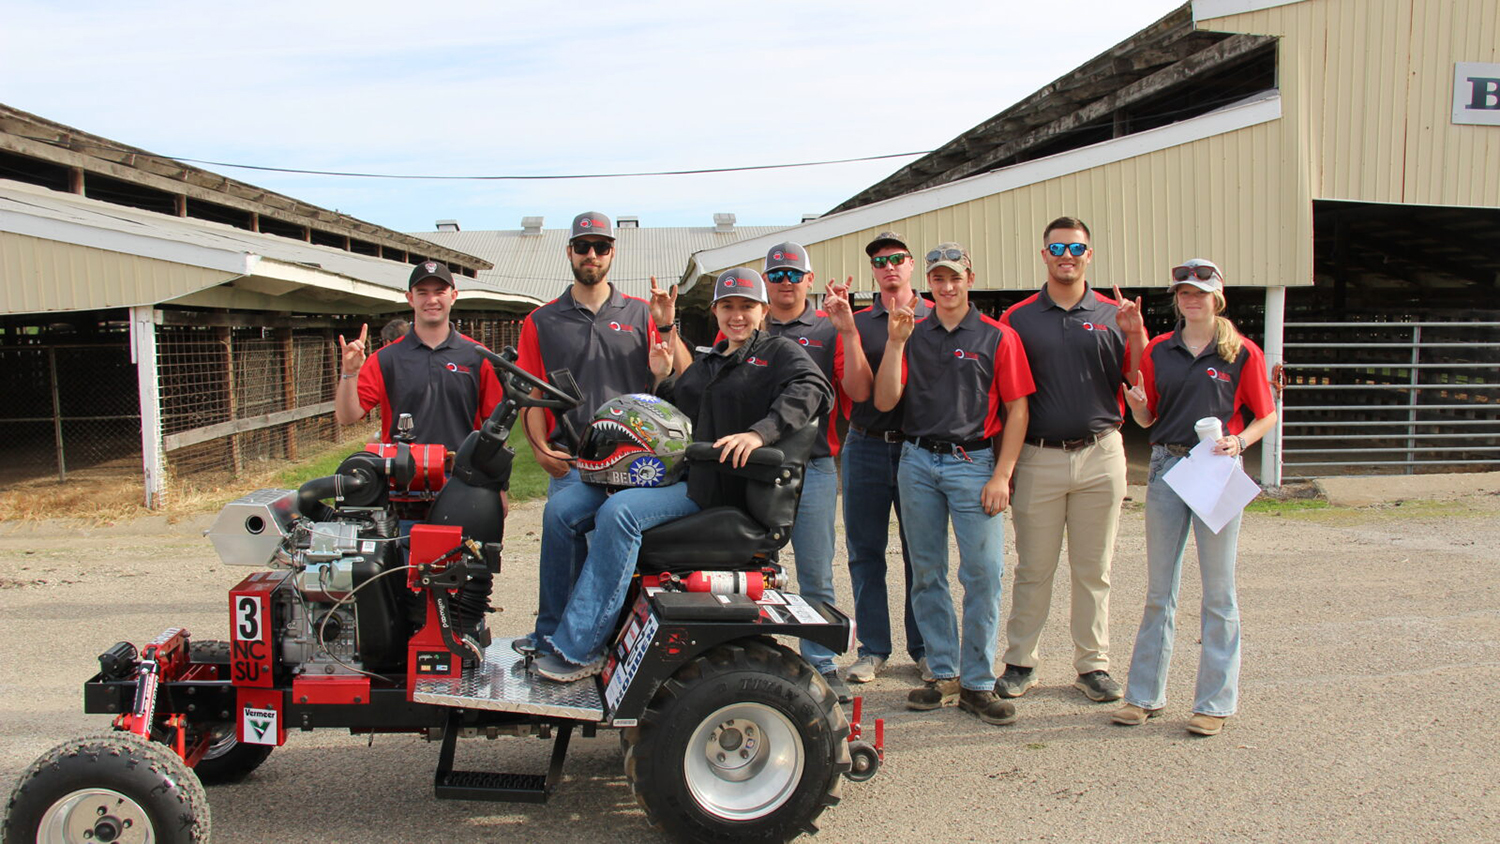 The NC State "Pack Pullers" pose as a group with their tractor.